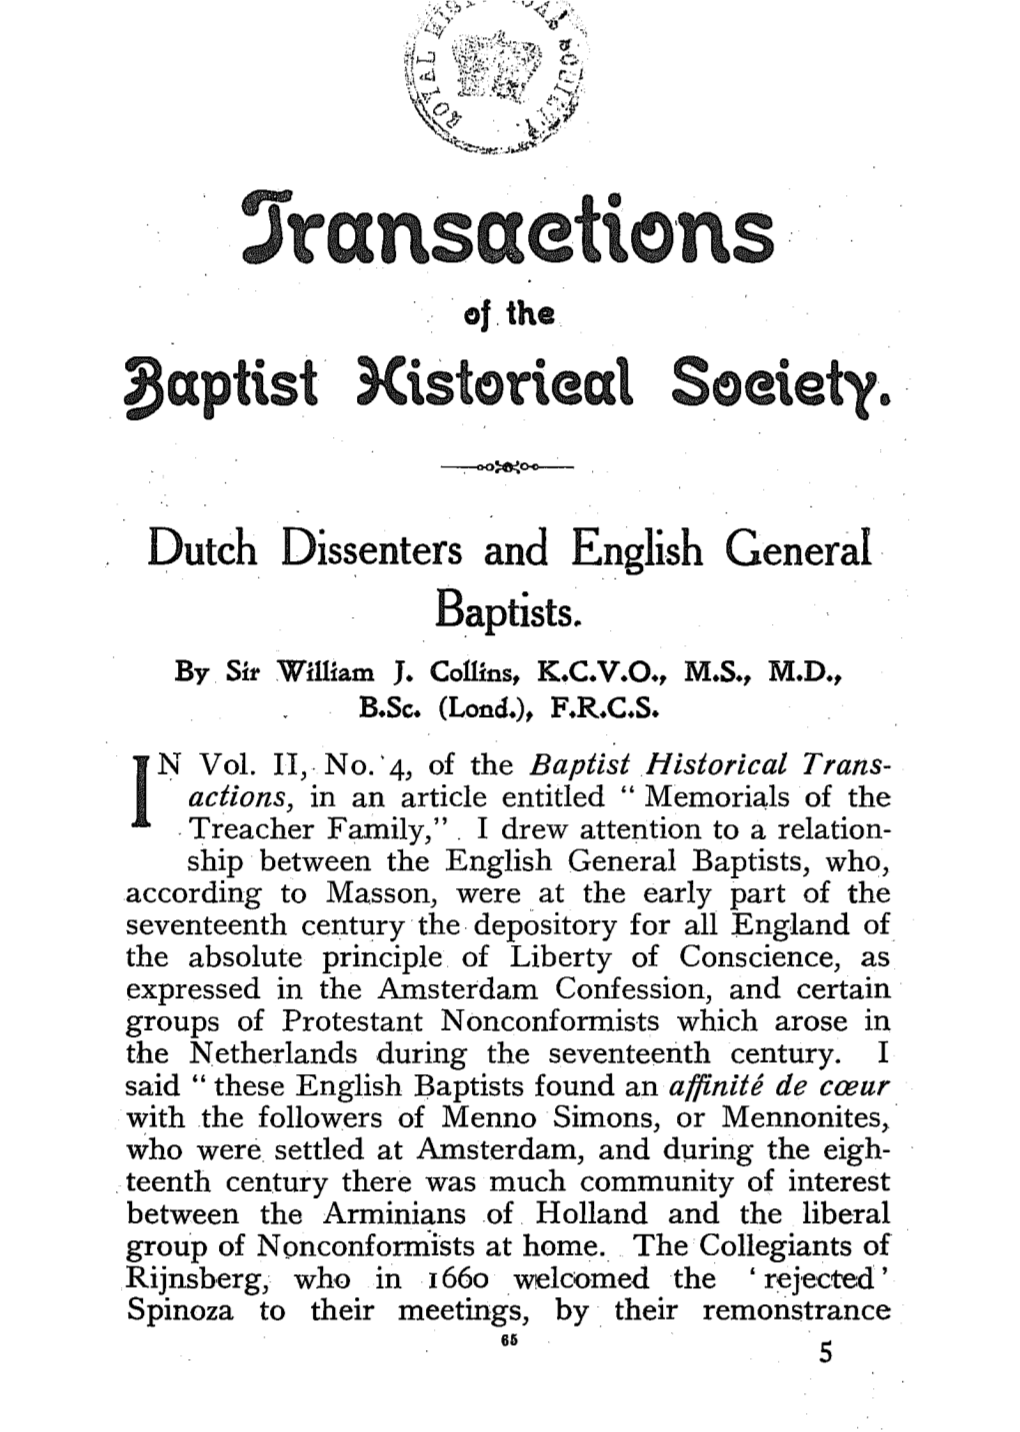 Dutch Dissenters and English General Baptists